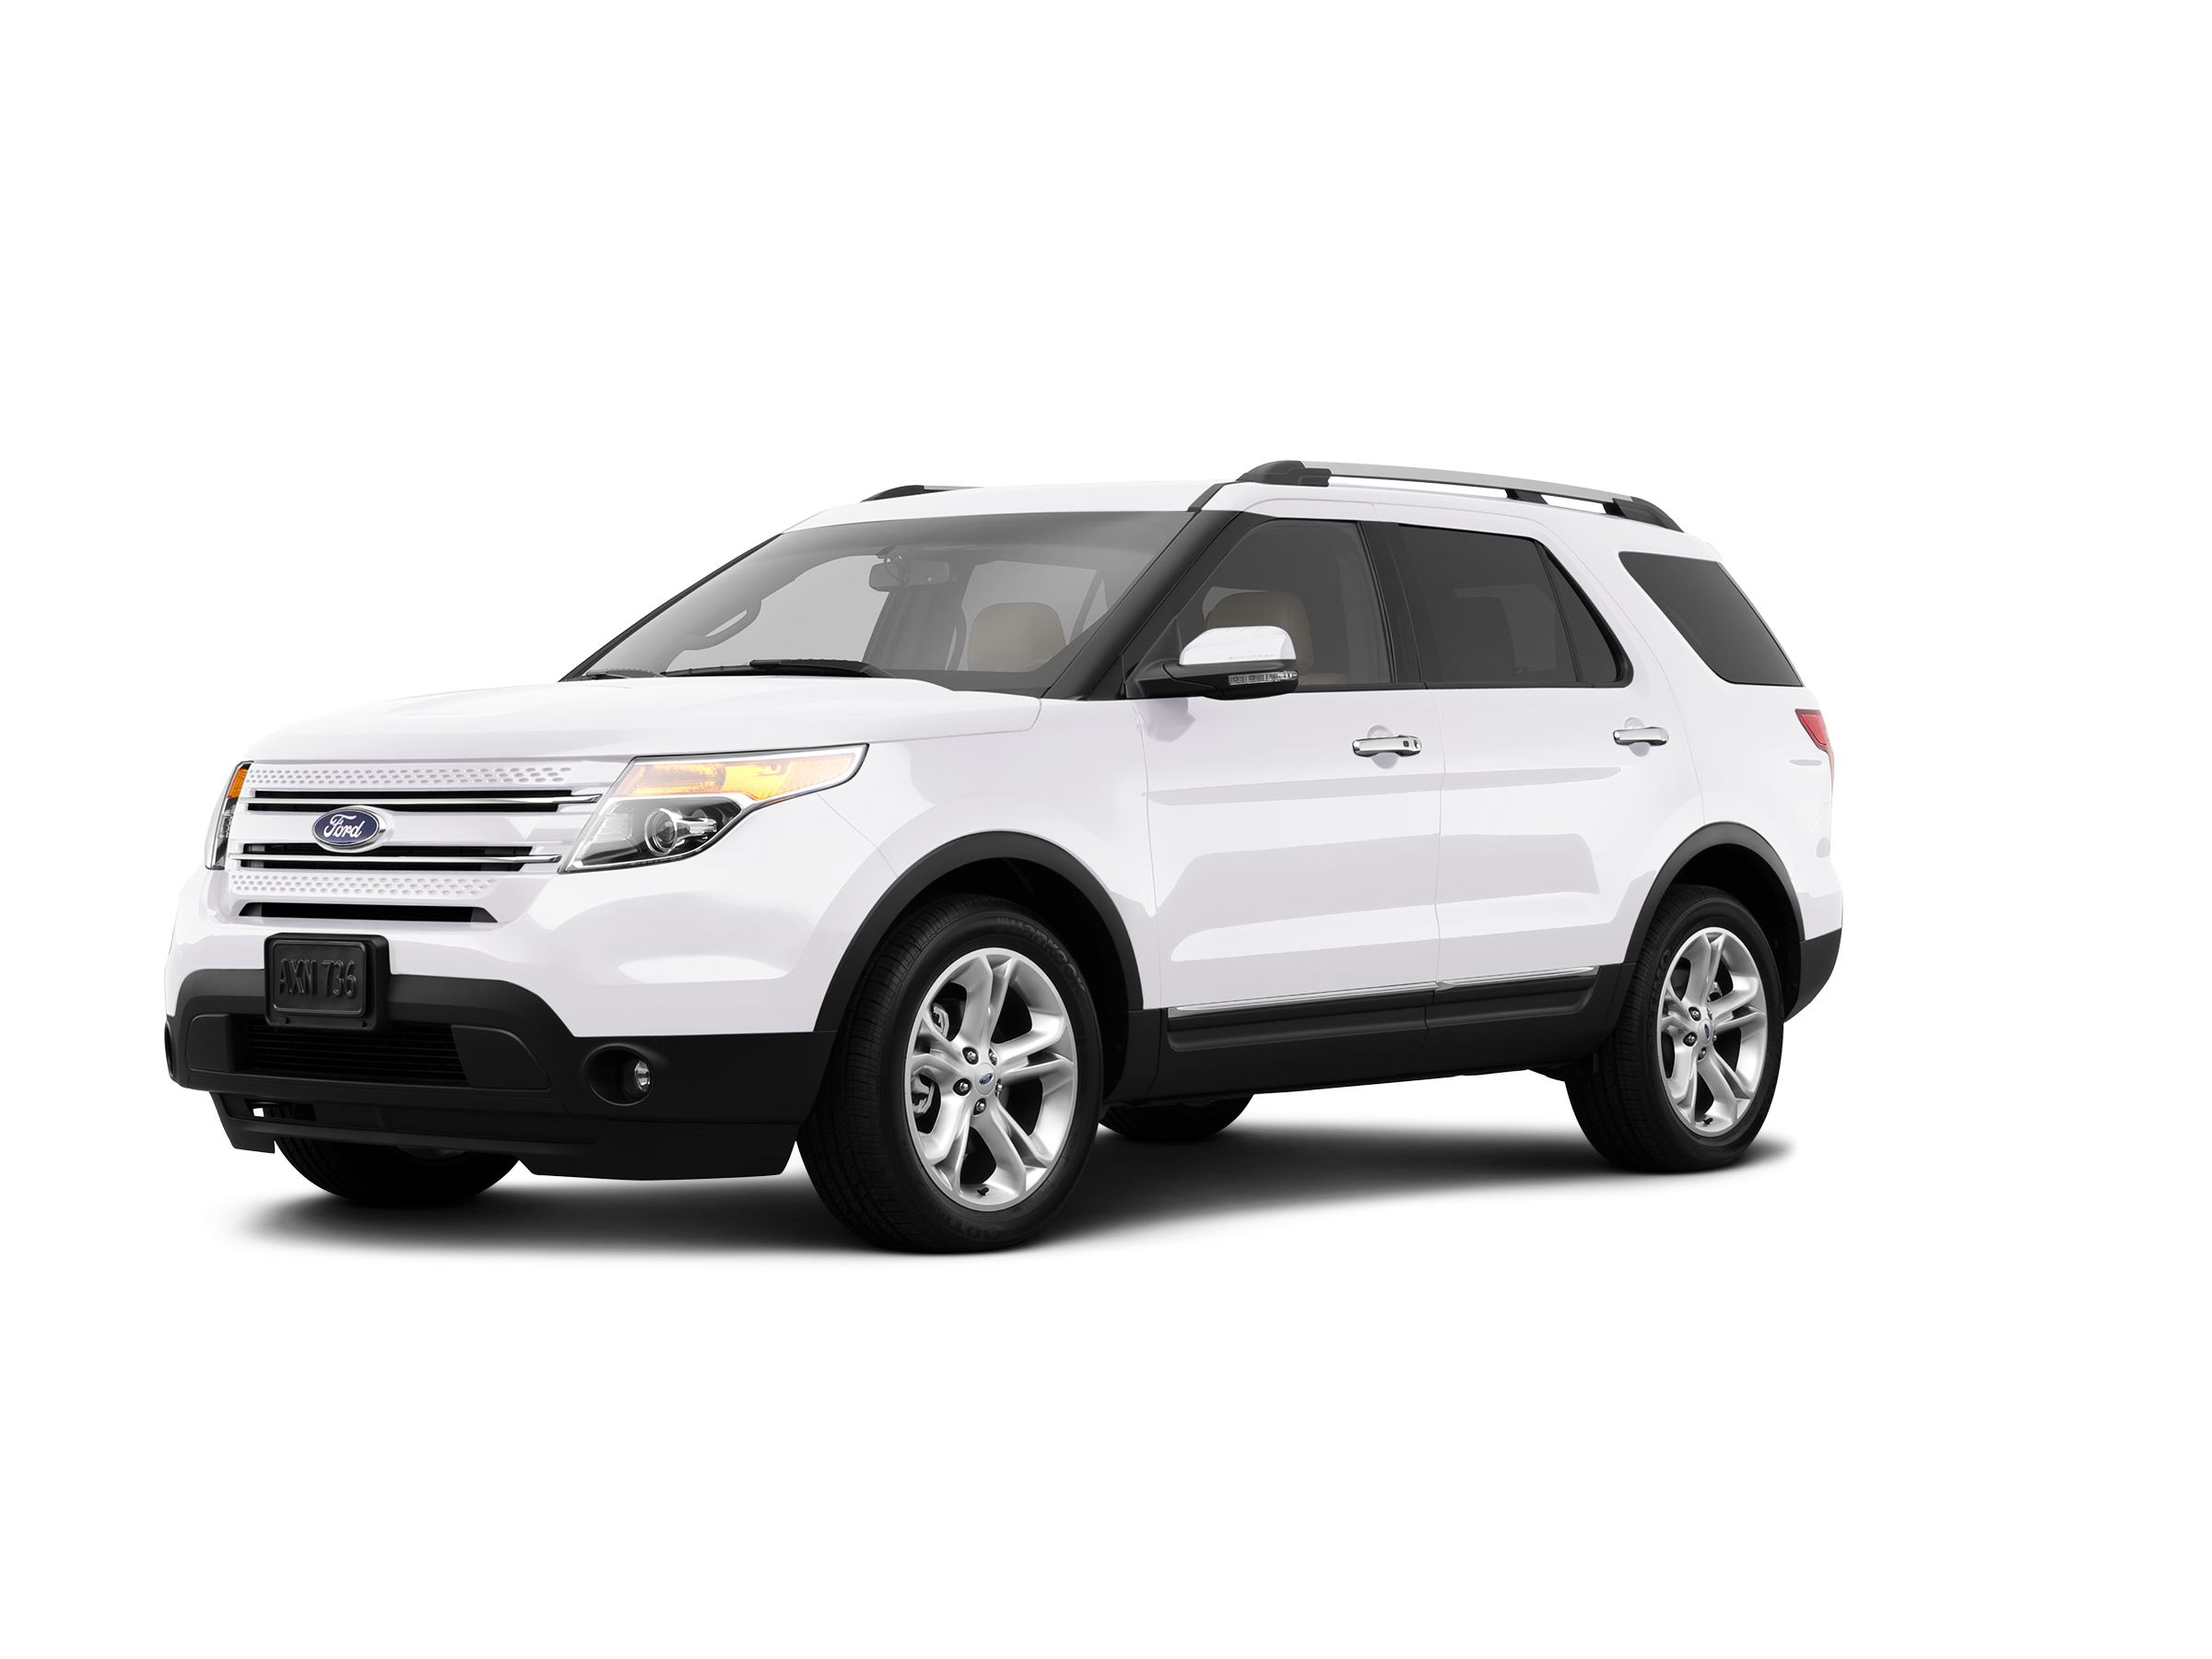 2013 Ford Explorer - Limited Sport Utility 4D Woodland Beverly Hills  Thousand Oaks Van Nuy - YouTube